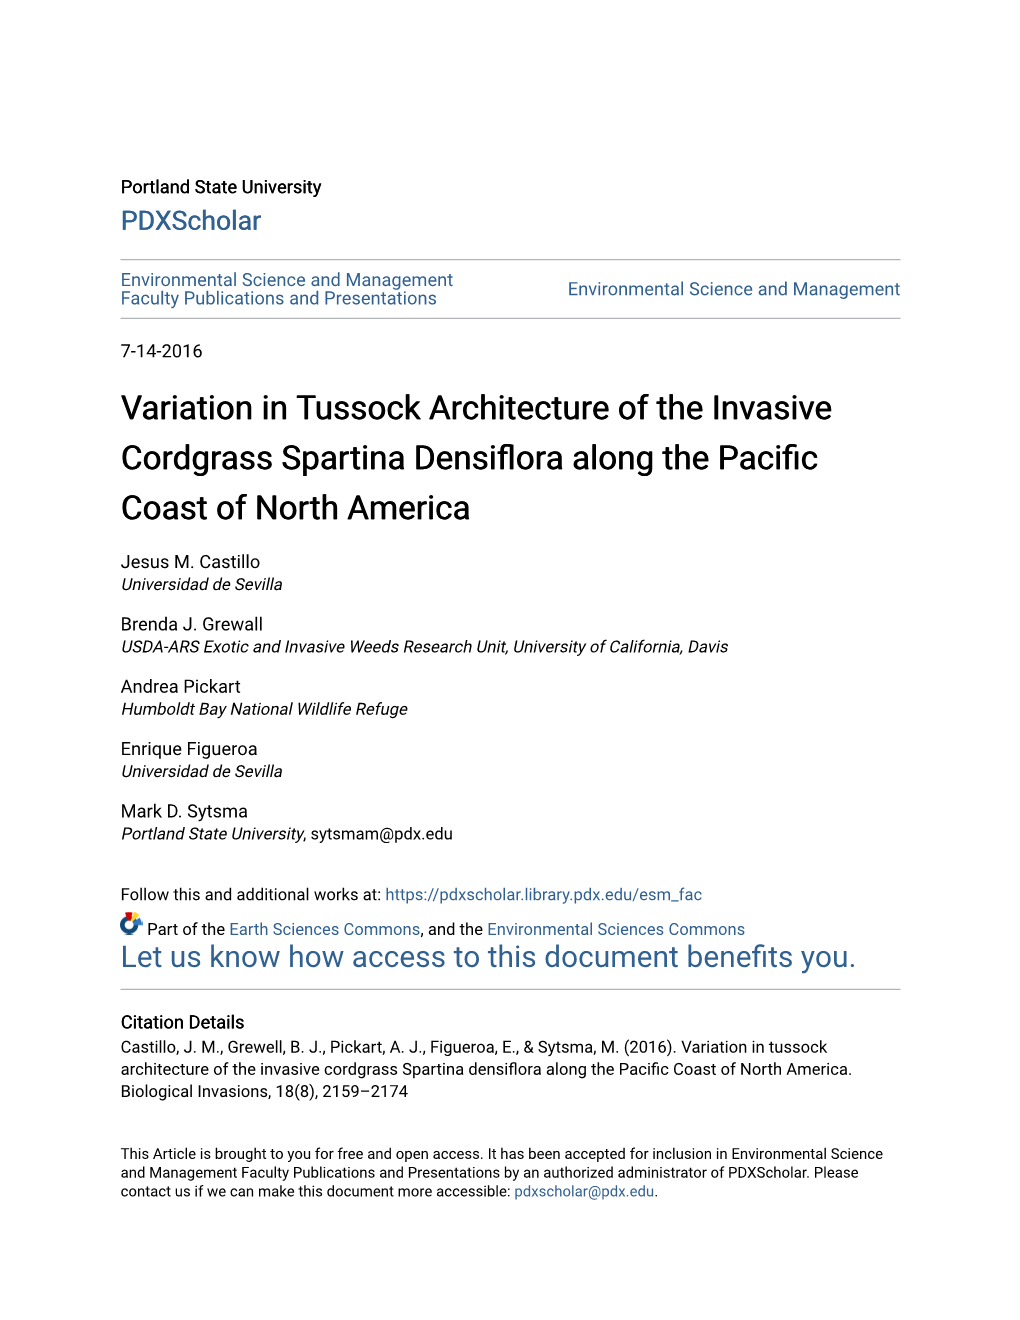 Variation in Tussock Architecture of the Invasive Cordgrass Spartina Densiflora Along the Pacific Coast of North America